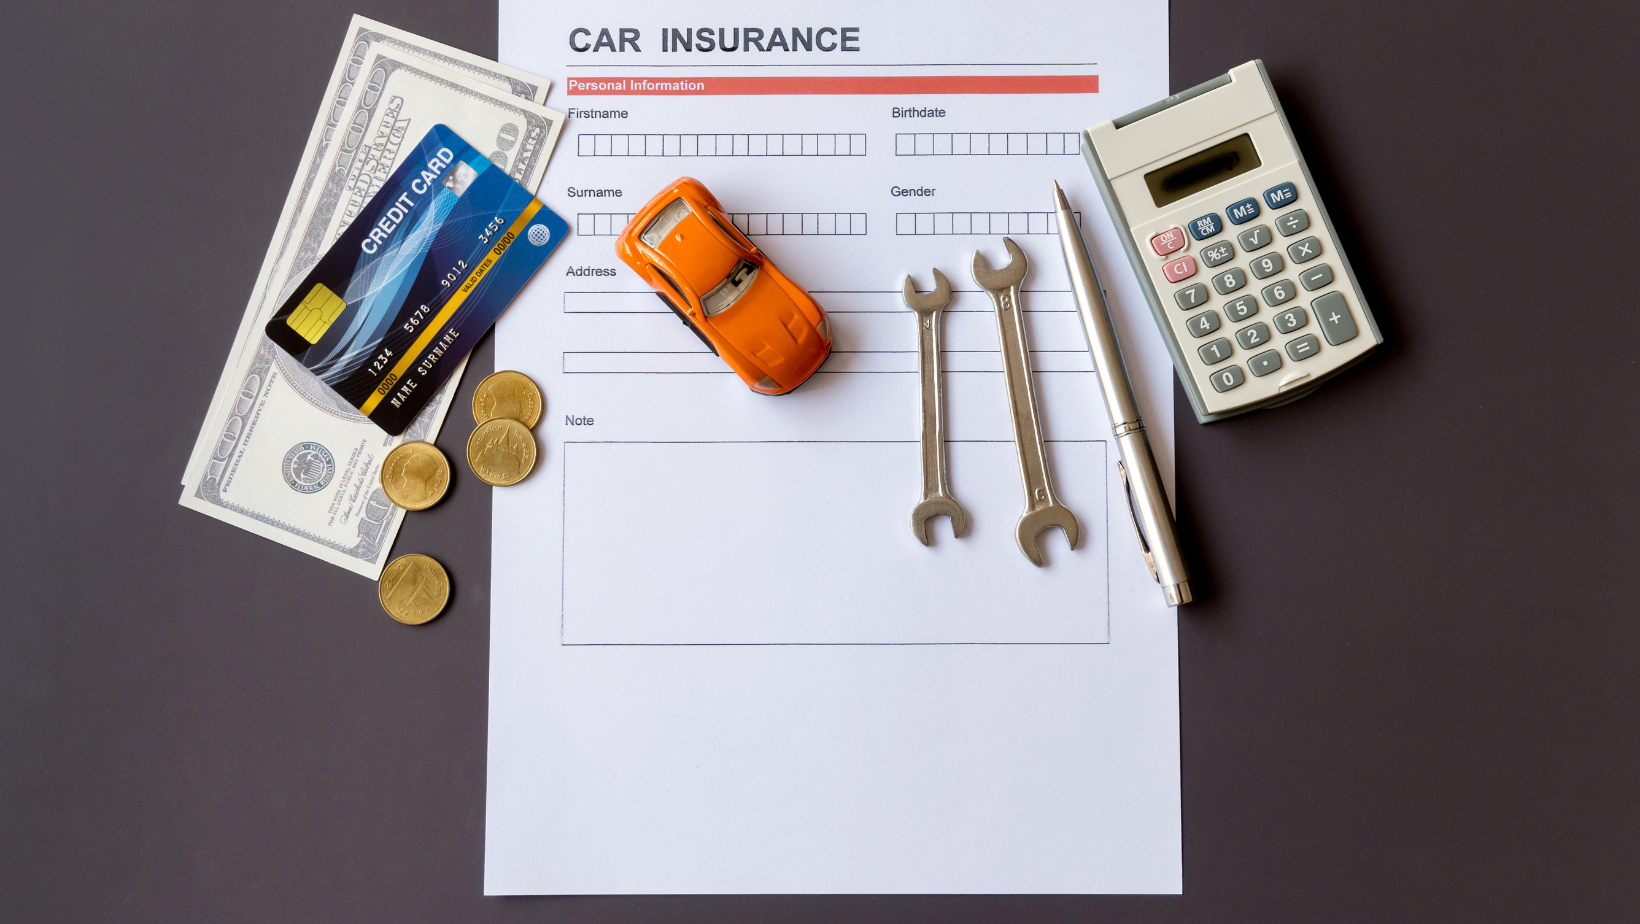 Other possible factor affecting who pays for car damage in a no-fault accident